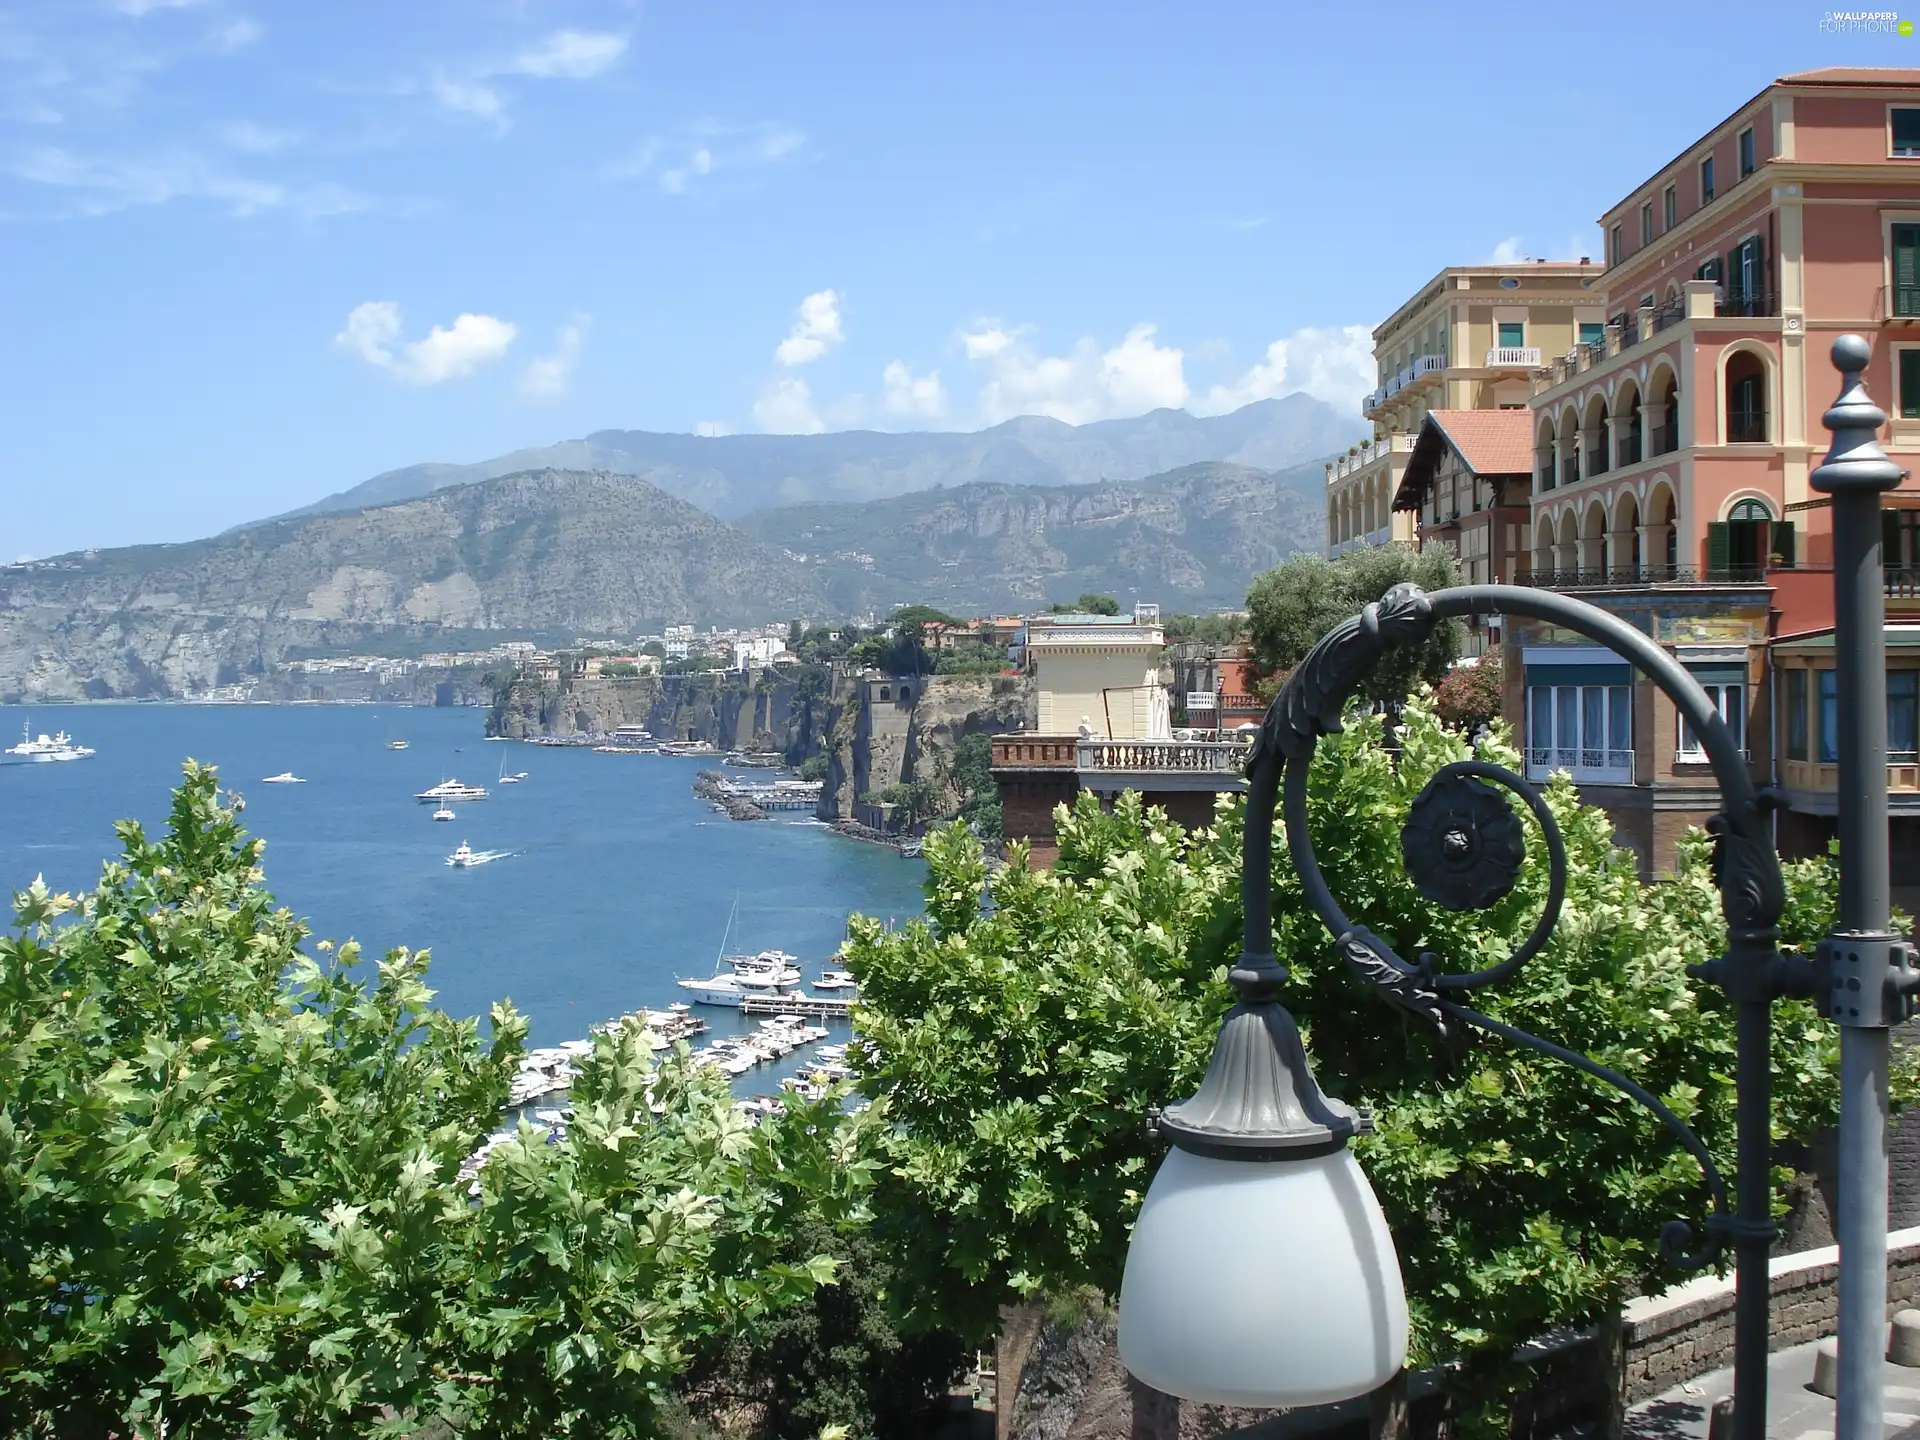 trees, Italy, Houses, Lamp, Sorrento, viewes, water